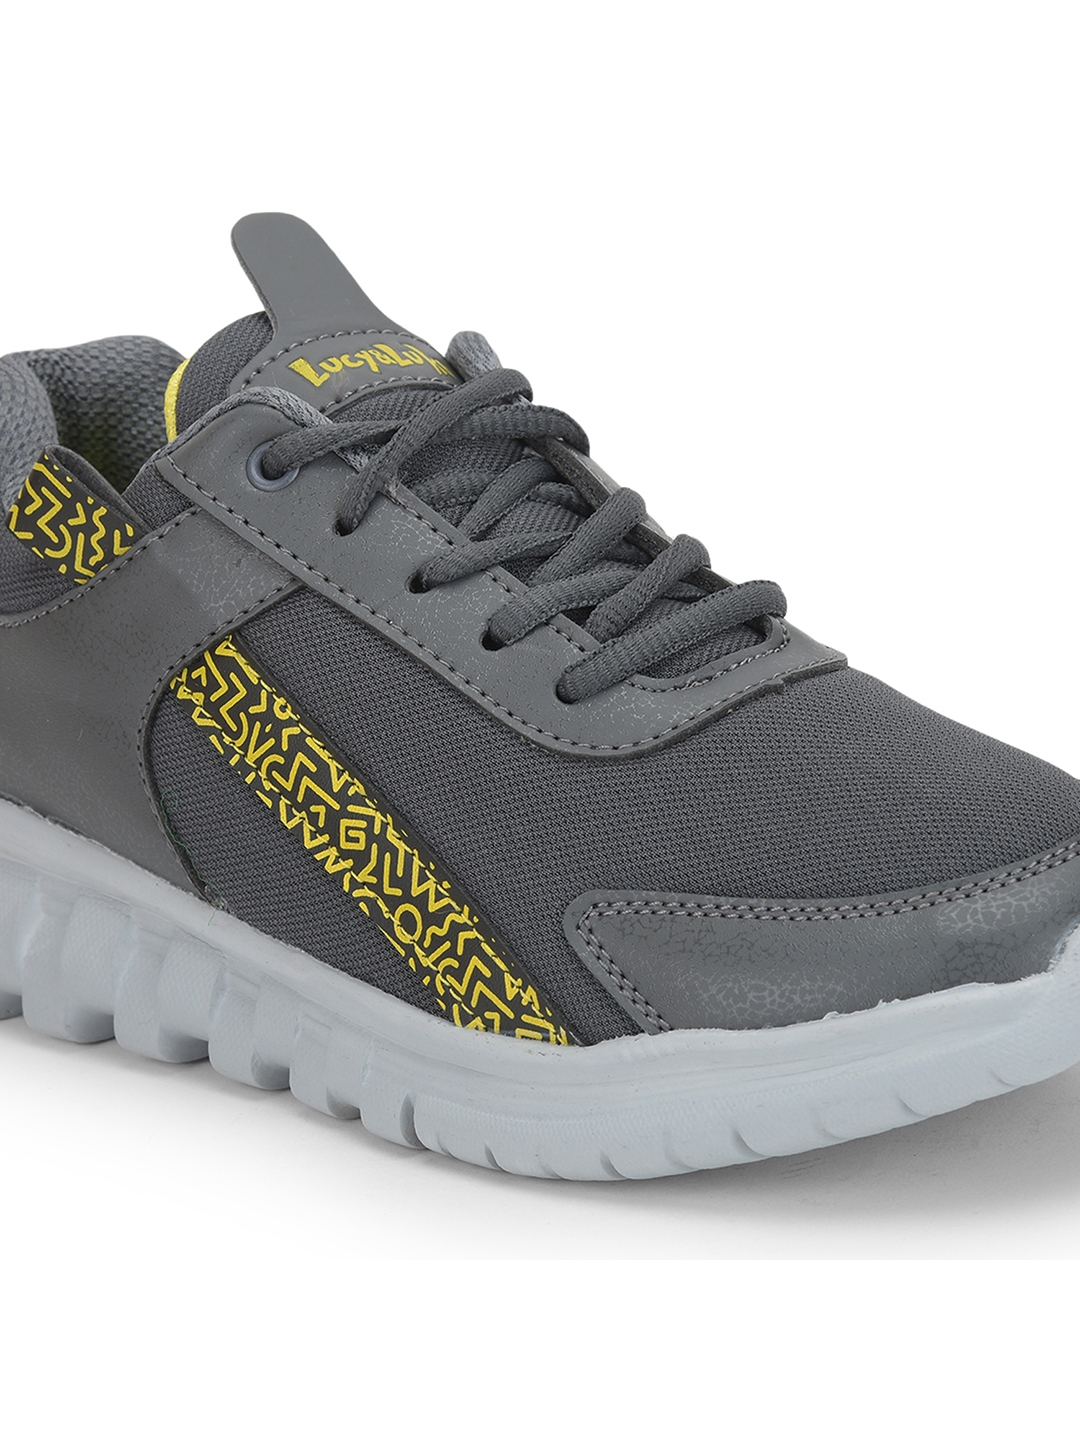 Unisex Lucy and Luke Grey Running Shoes